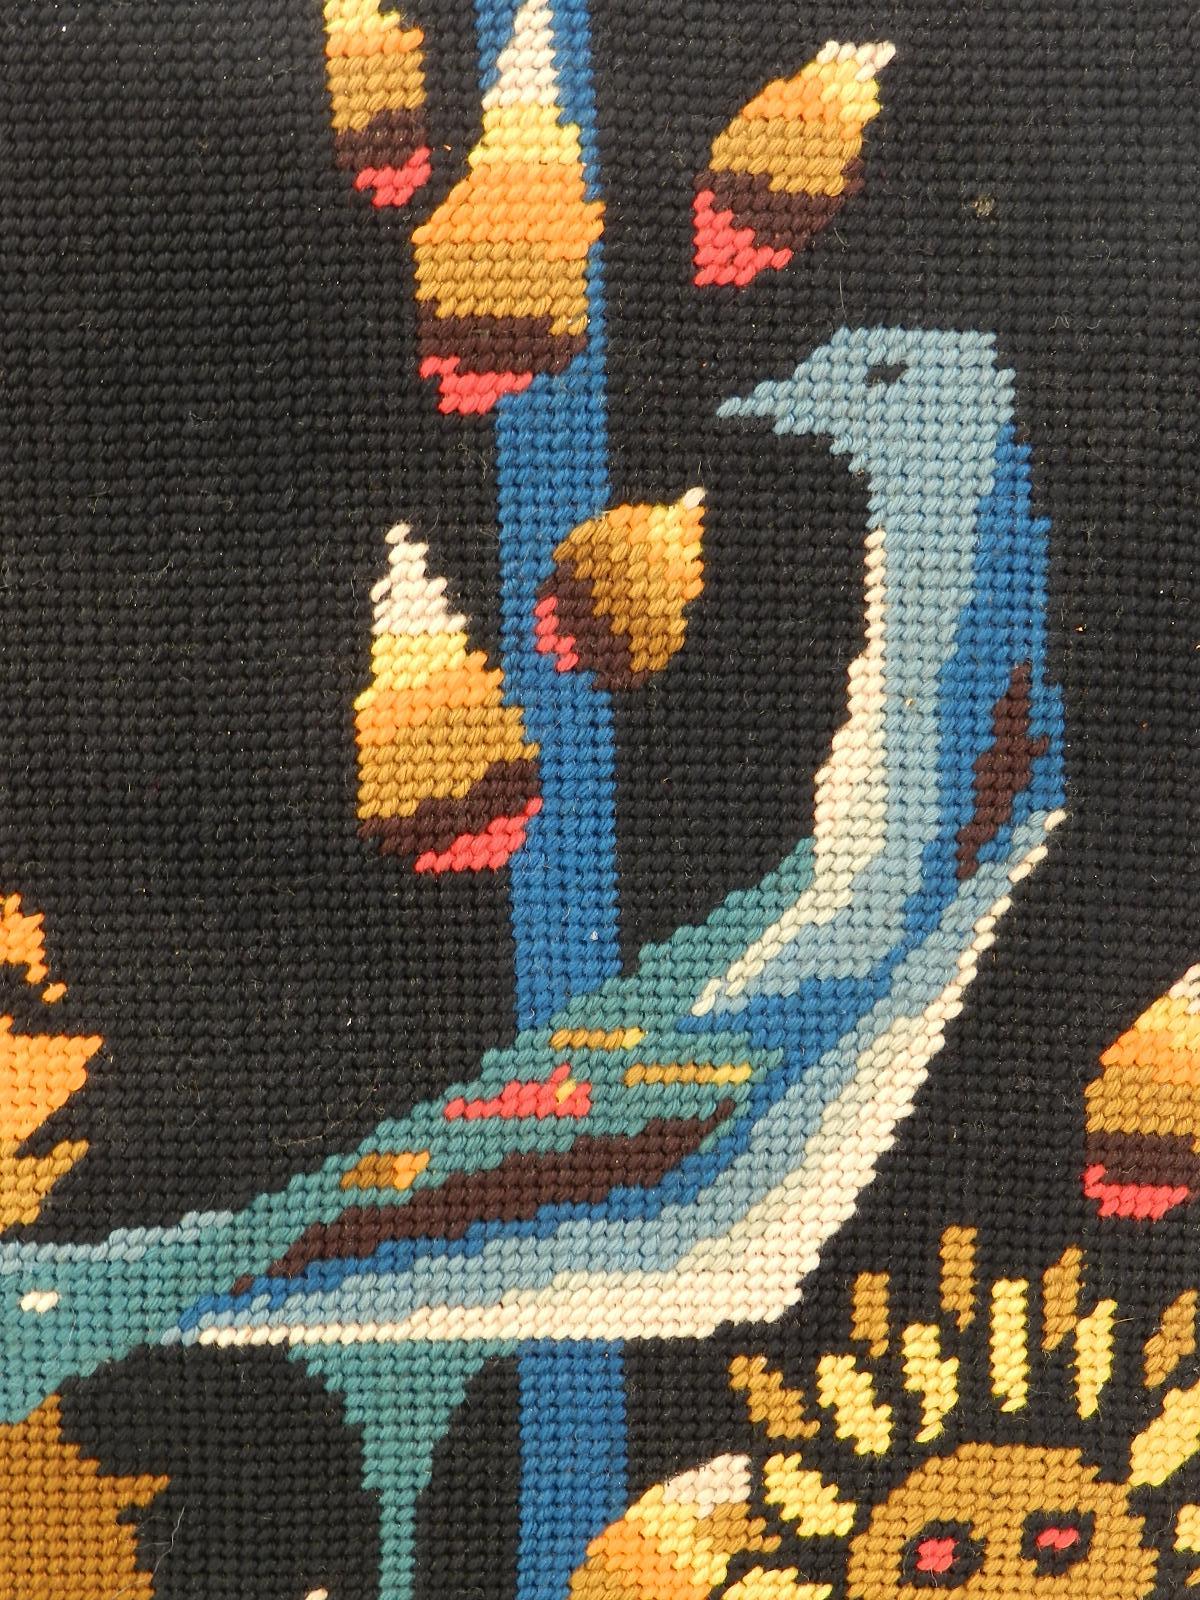 Midcentury tapestry wall hanging French needlepoint in the manner of Jean Lurcat and Picart Le Doux
Decorative embroidered needlework on canvas 1930s-1950s French Folk Art 
These works were popular French inspirations after the tapestries and